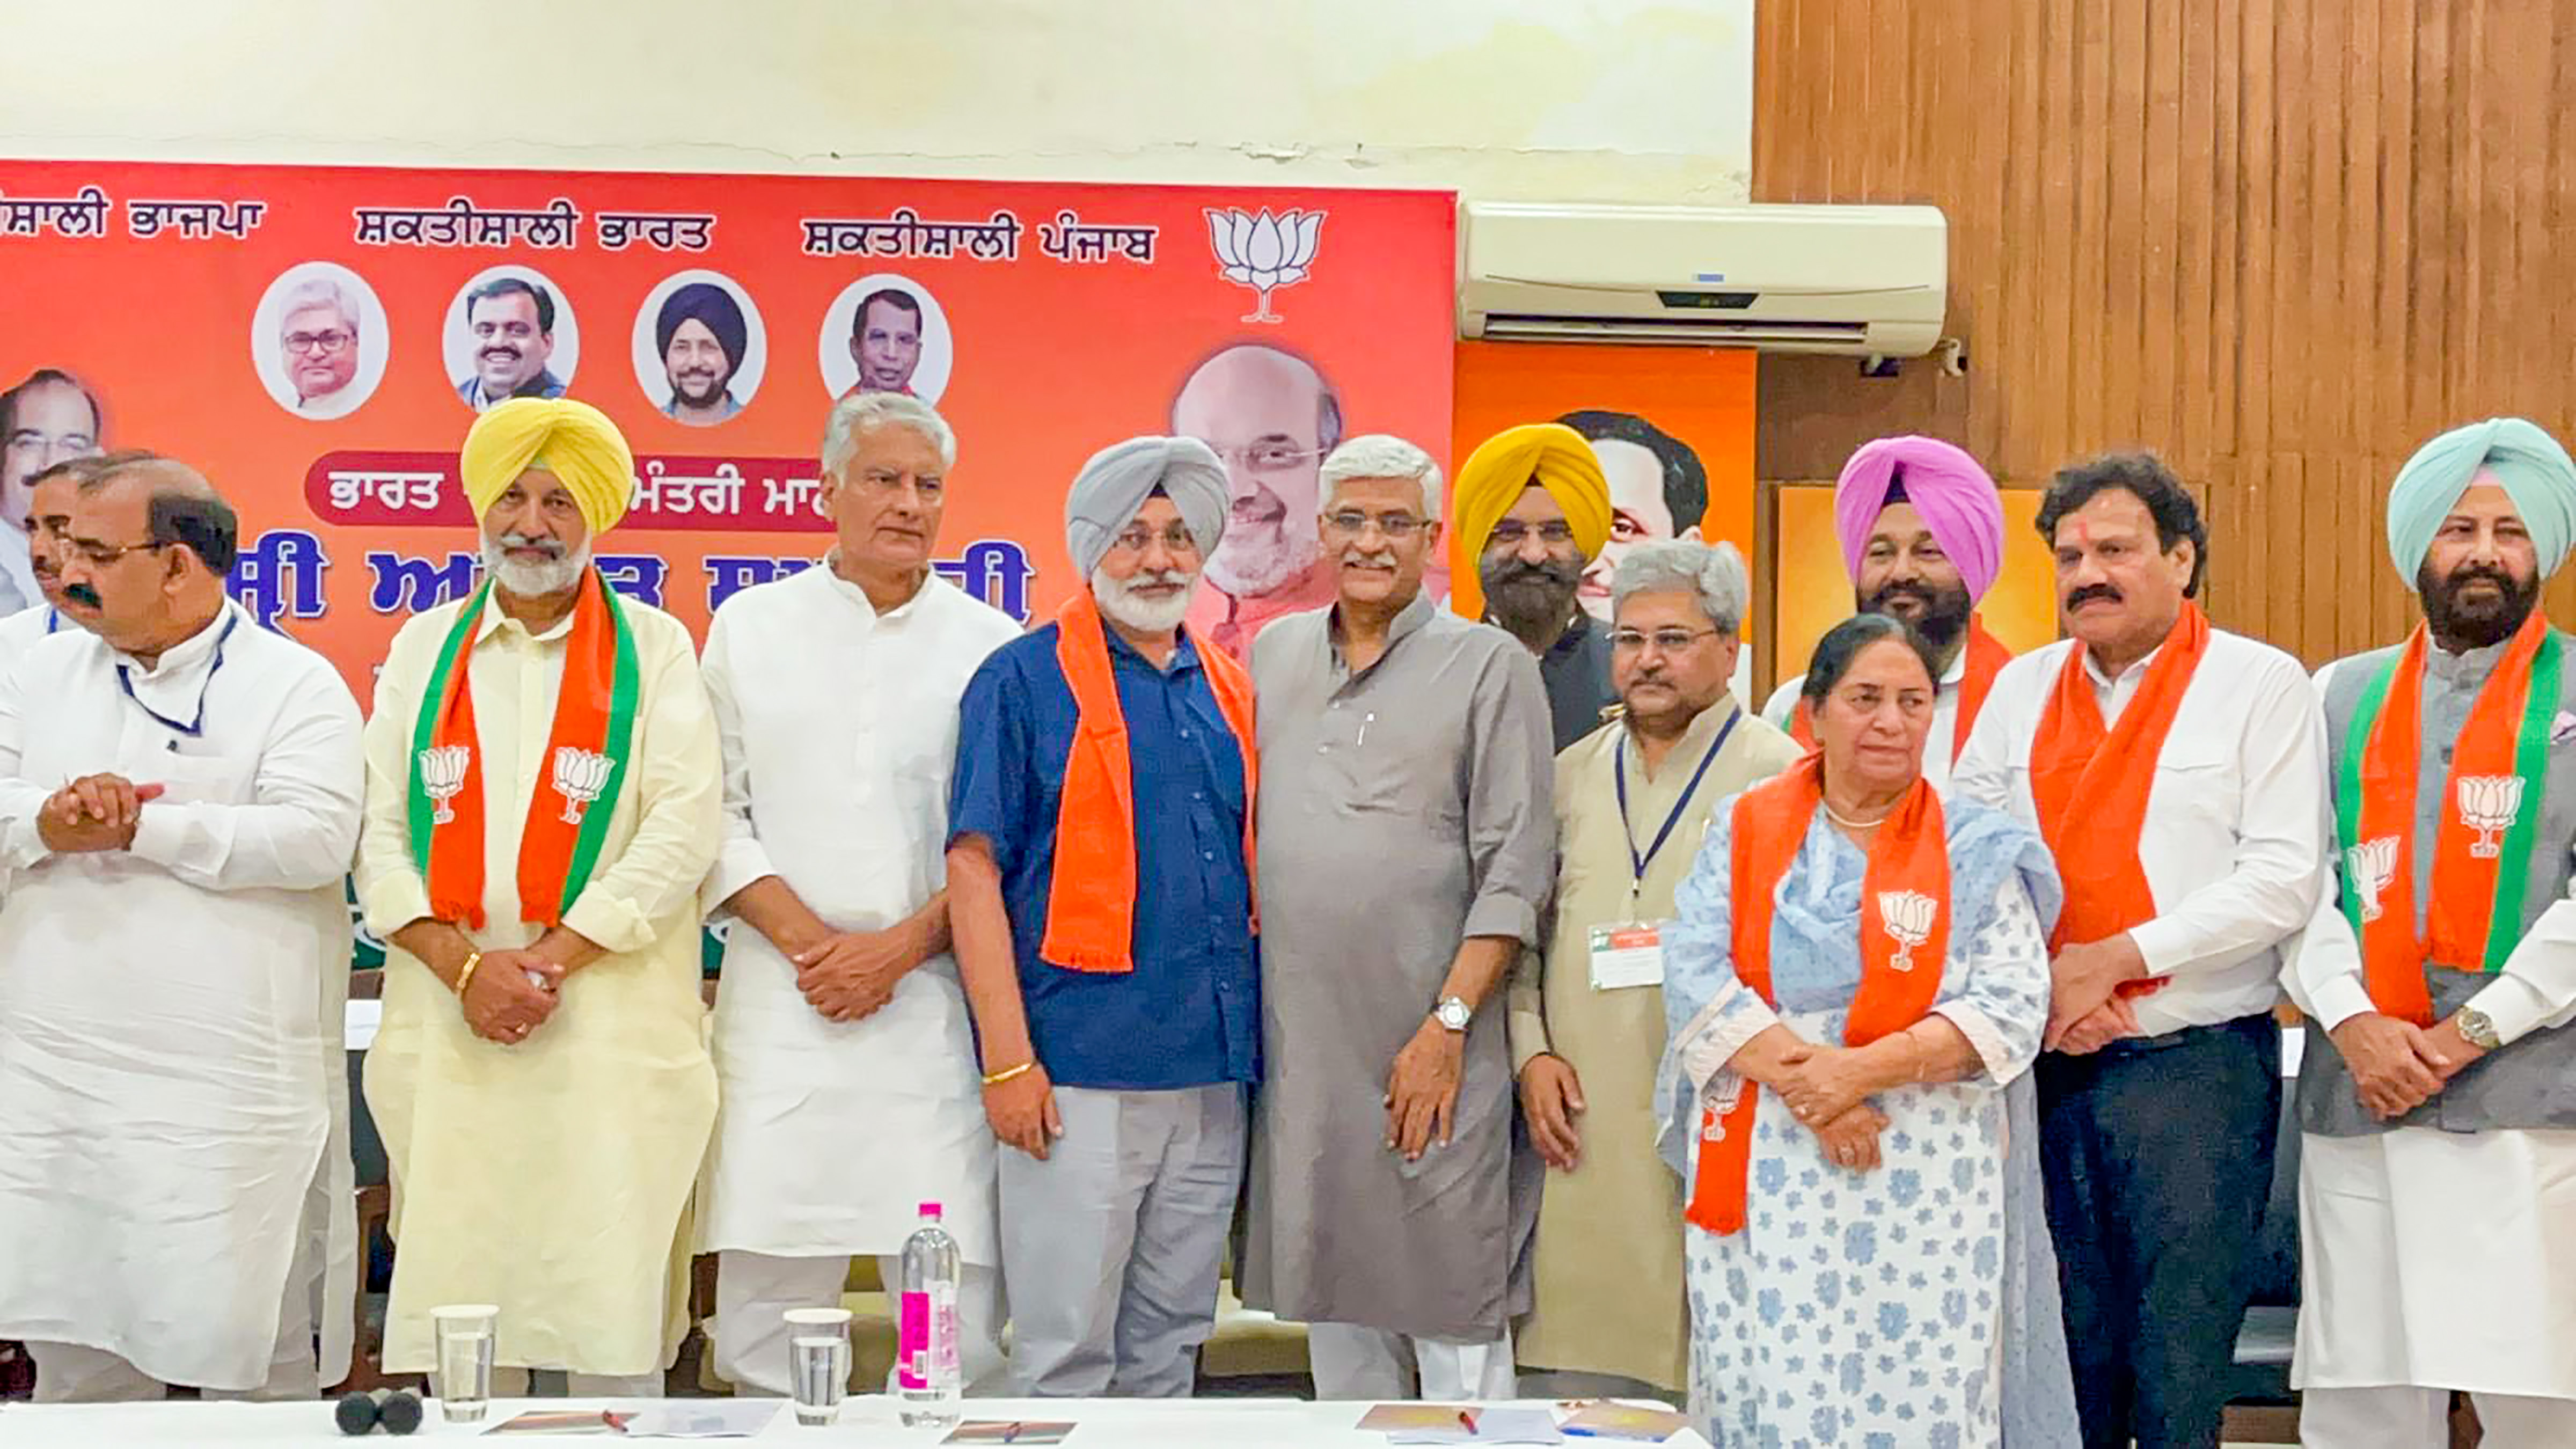 5 key Punjab Congress leaders join BJP in Amit Shah's presence; 'betrayed their mother for greener, nay, saffron pastures', says PCC chief